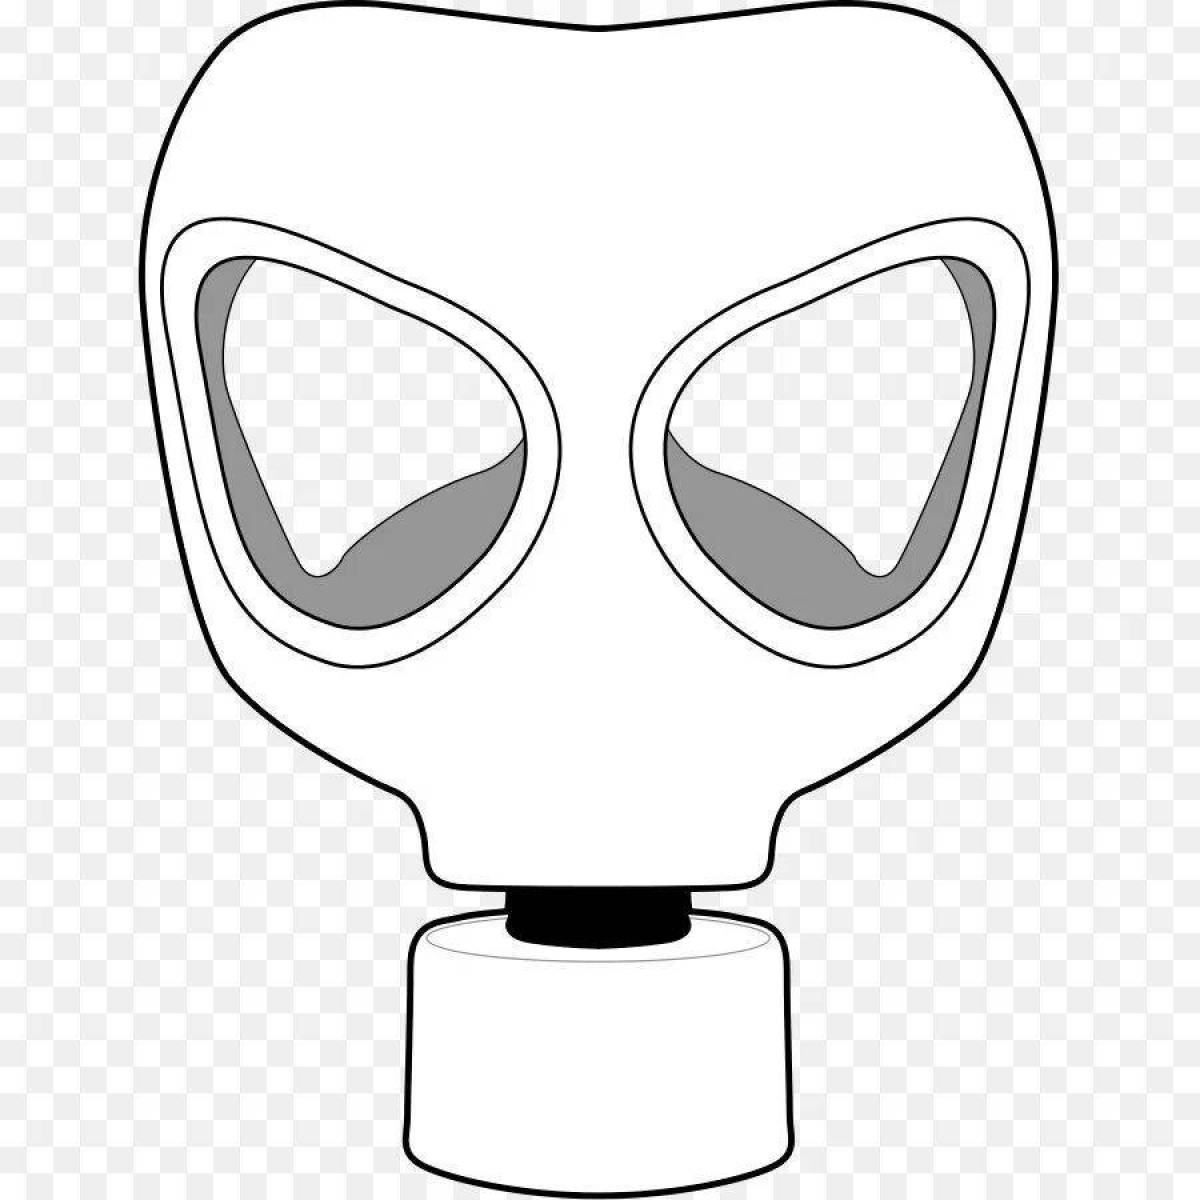 A striking mask coloring page